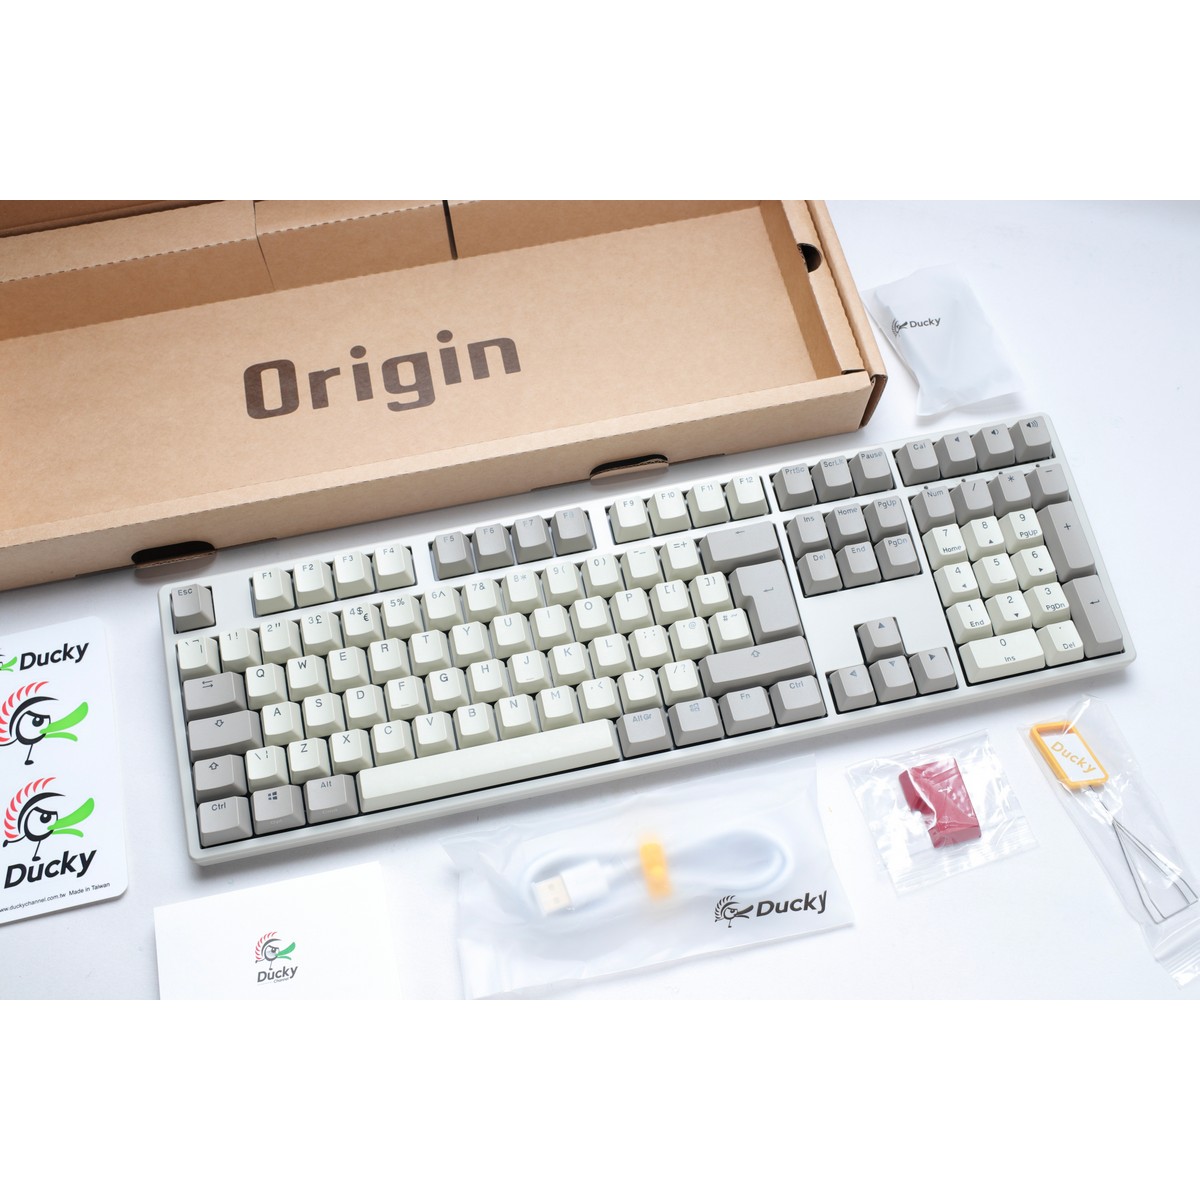 Ducky - Ducky Origin USB Mechanical Gaming Keyboard Cherry MX Silent Red - Vintage UK Lay